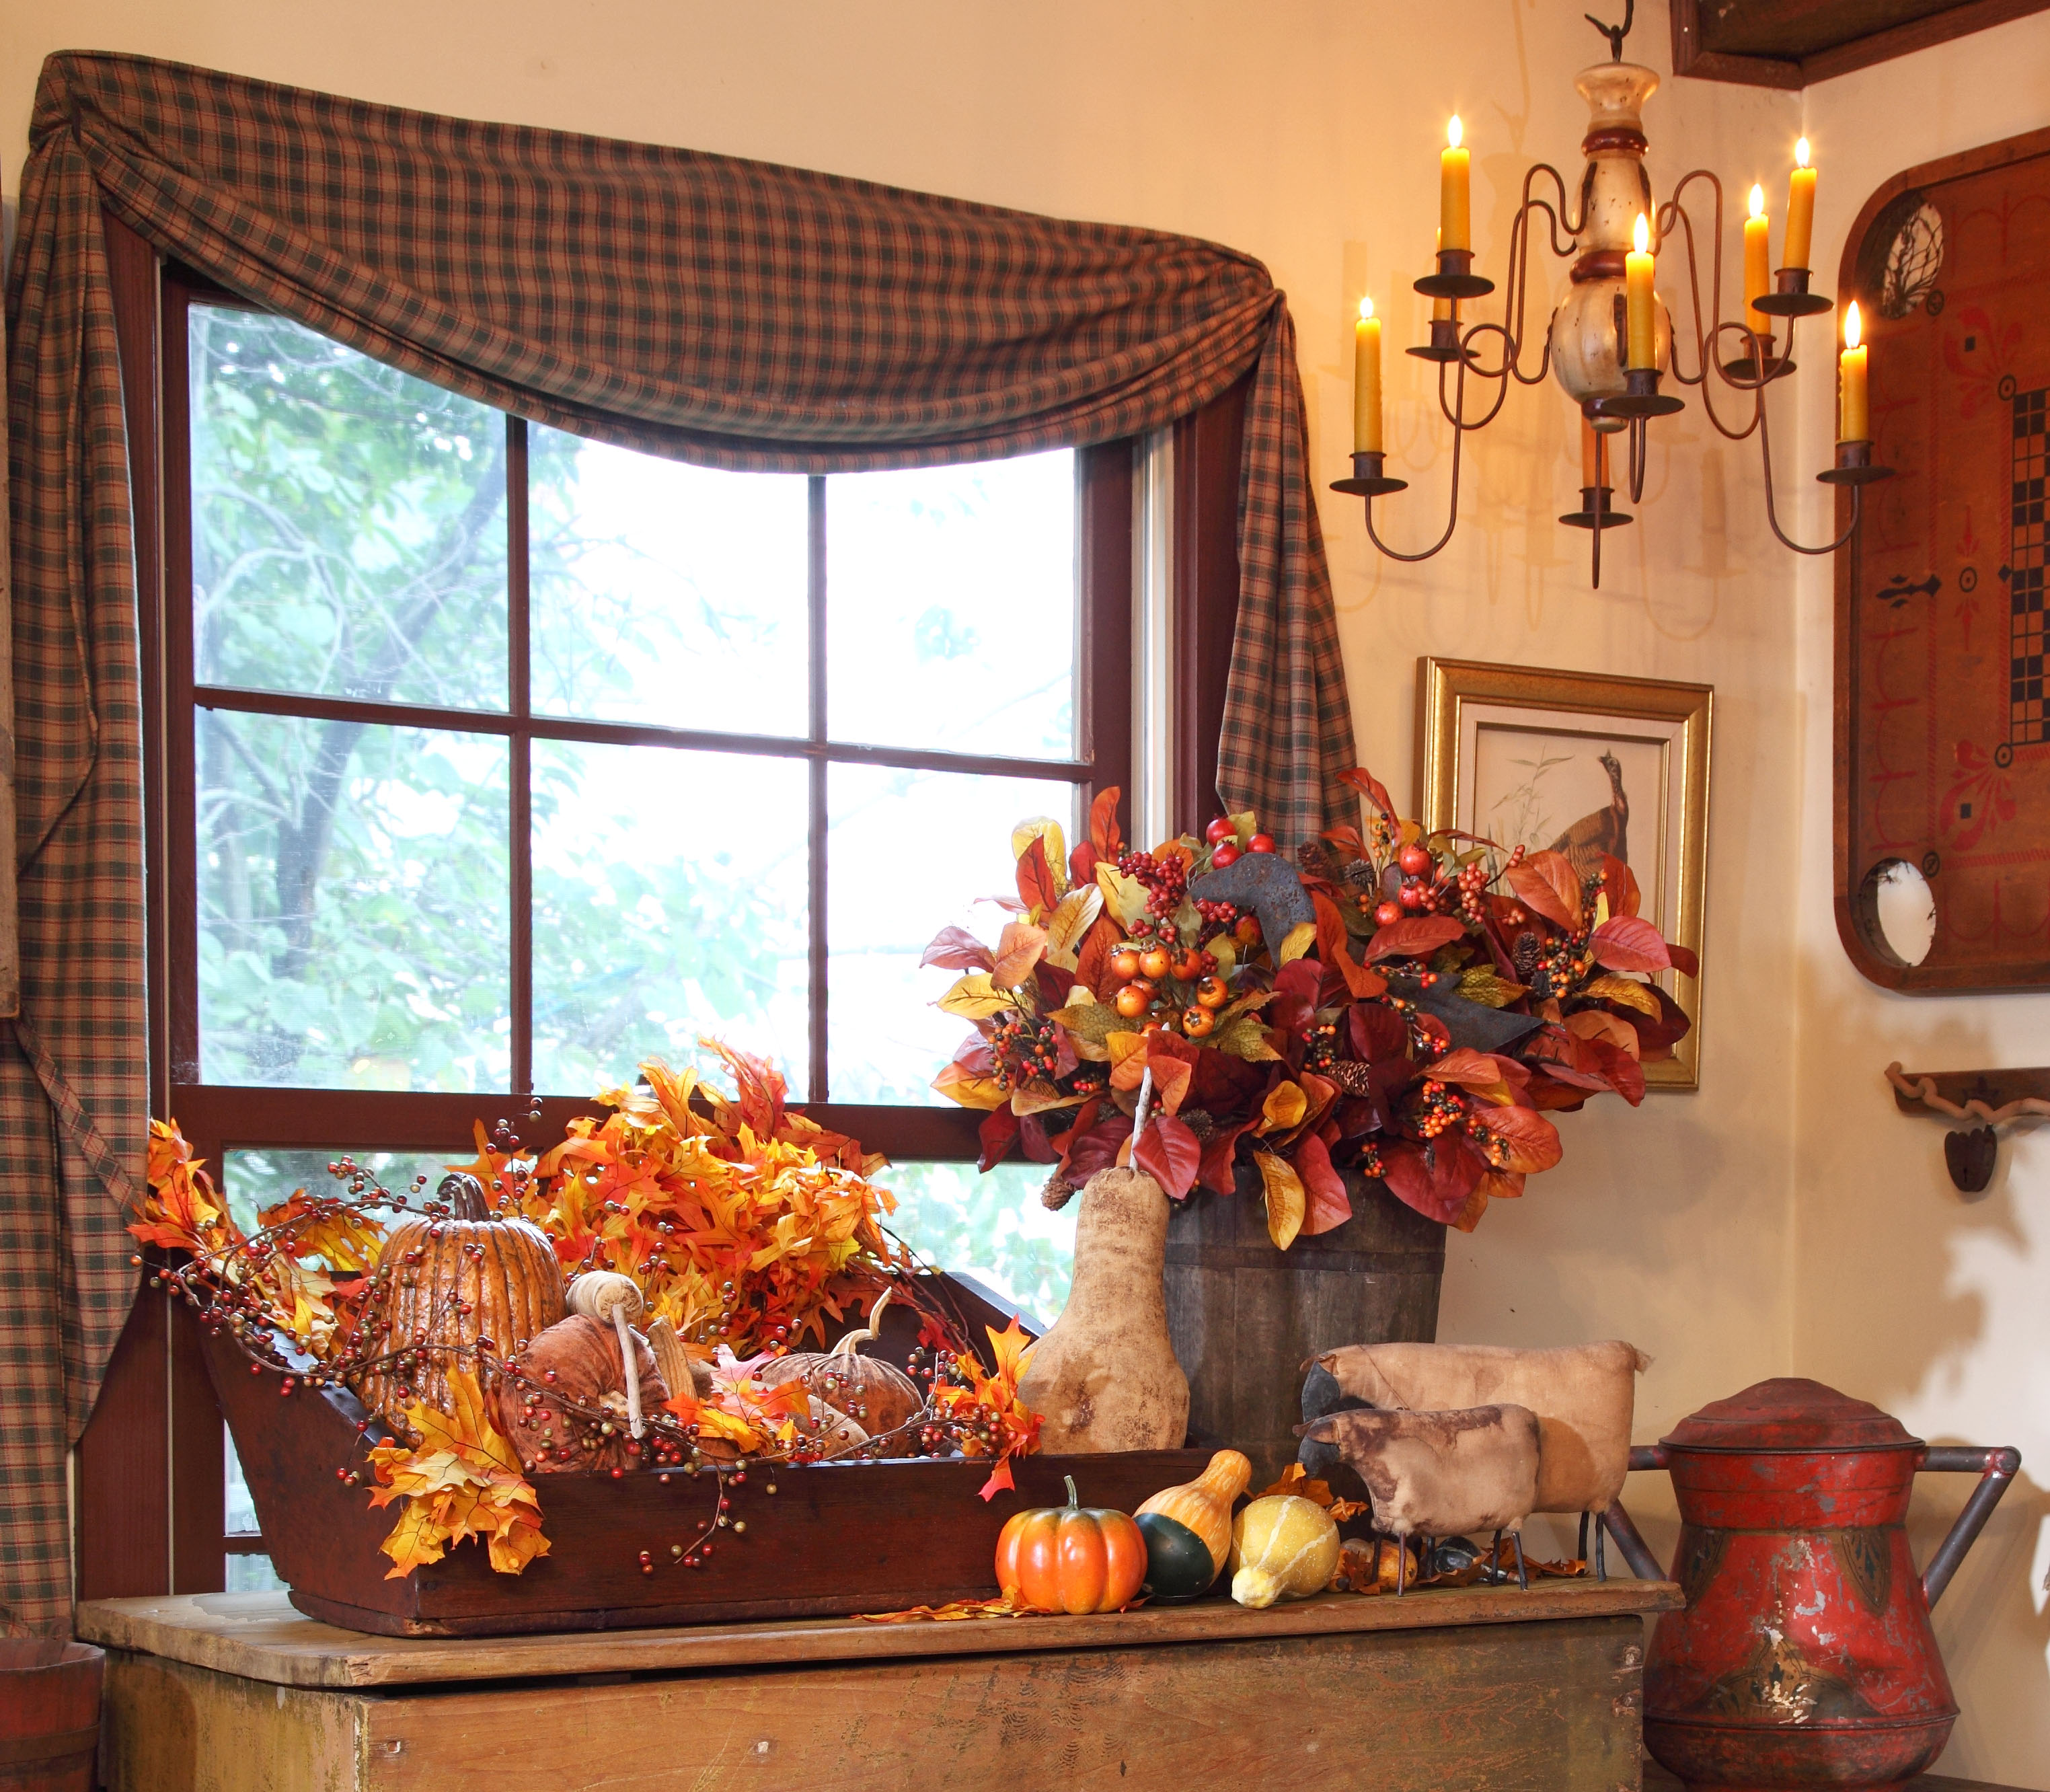 fall decorating decor autumn decorations decoration country decorated centerpiece beautiful outside inspiration quick tips kitchen inside porch interior diy outdoor